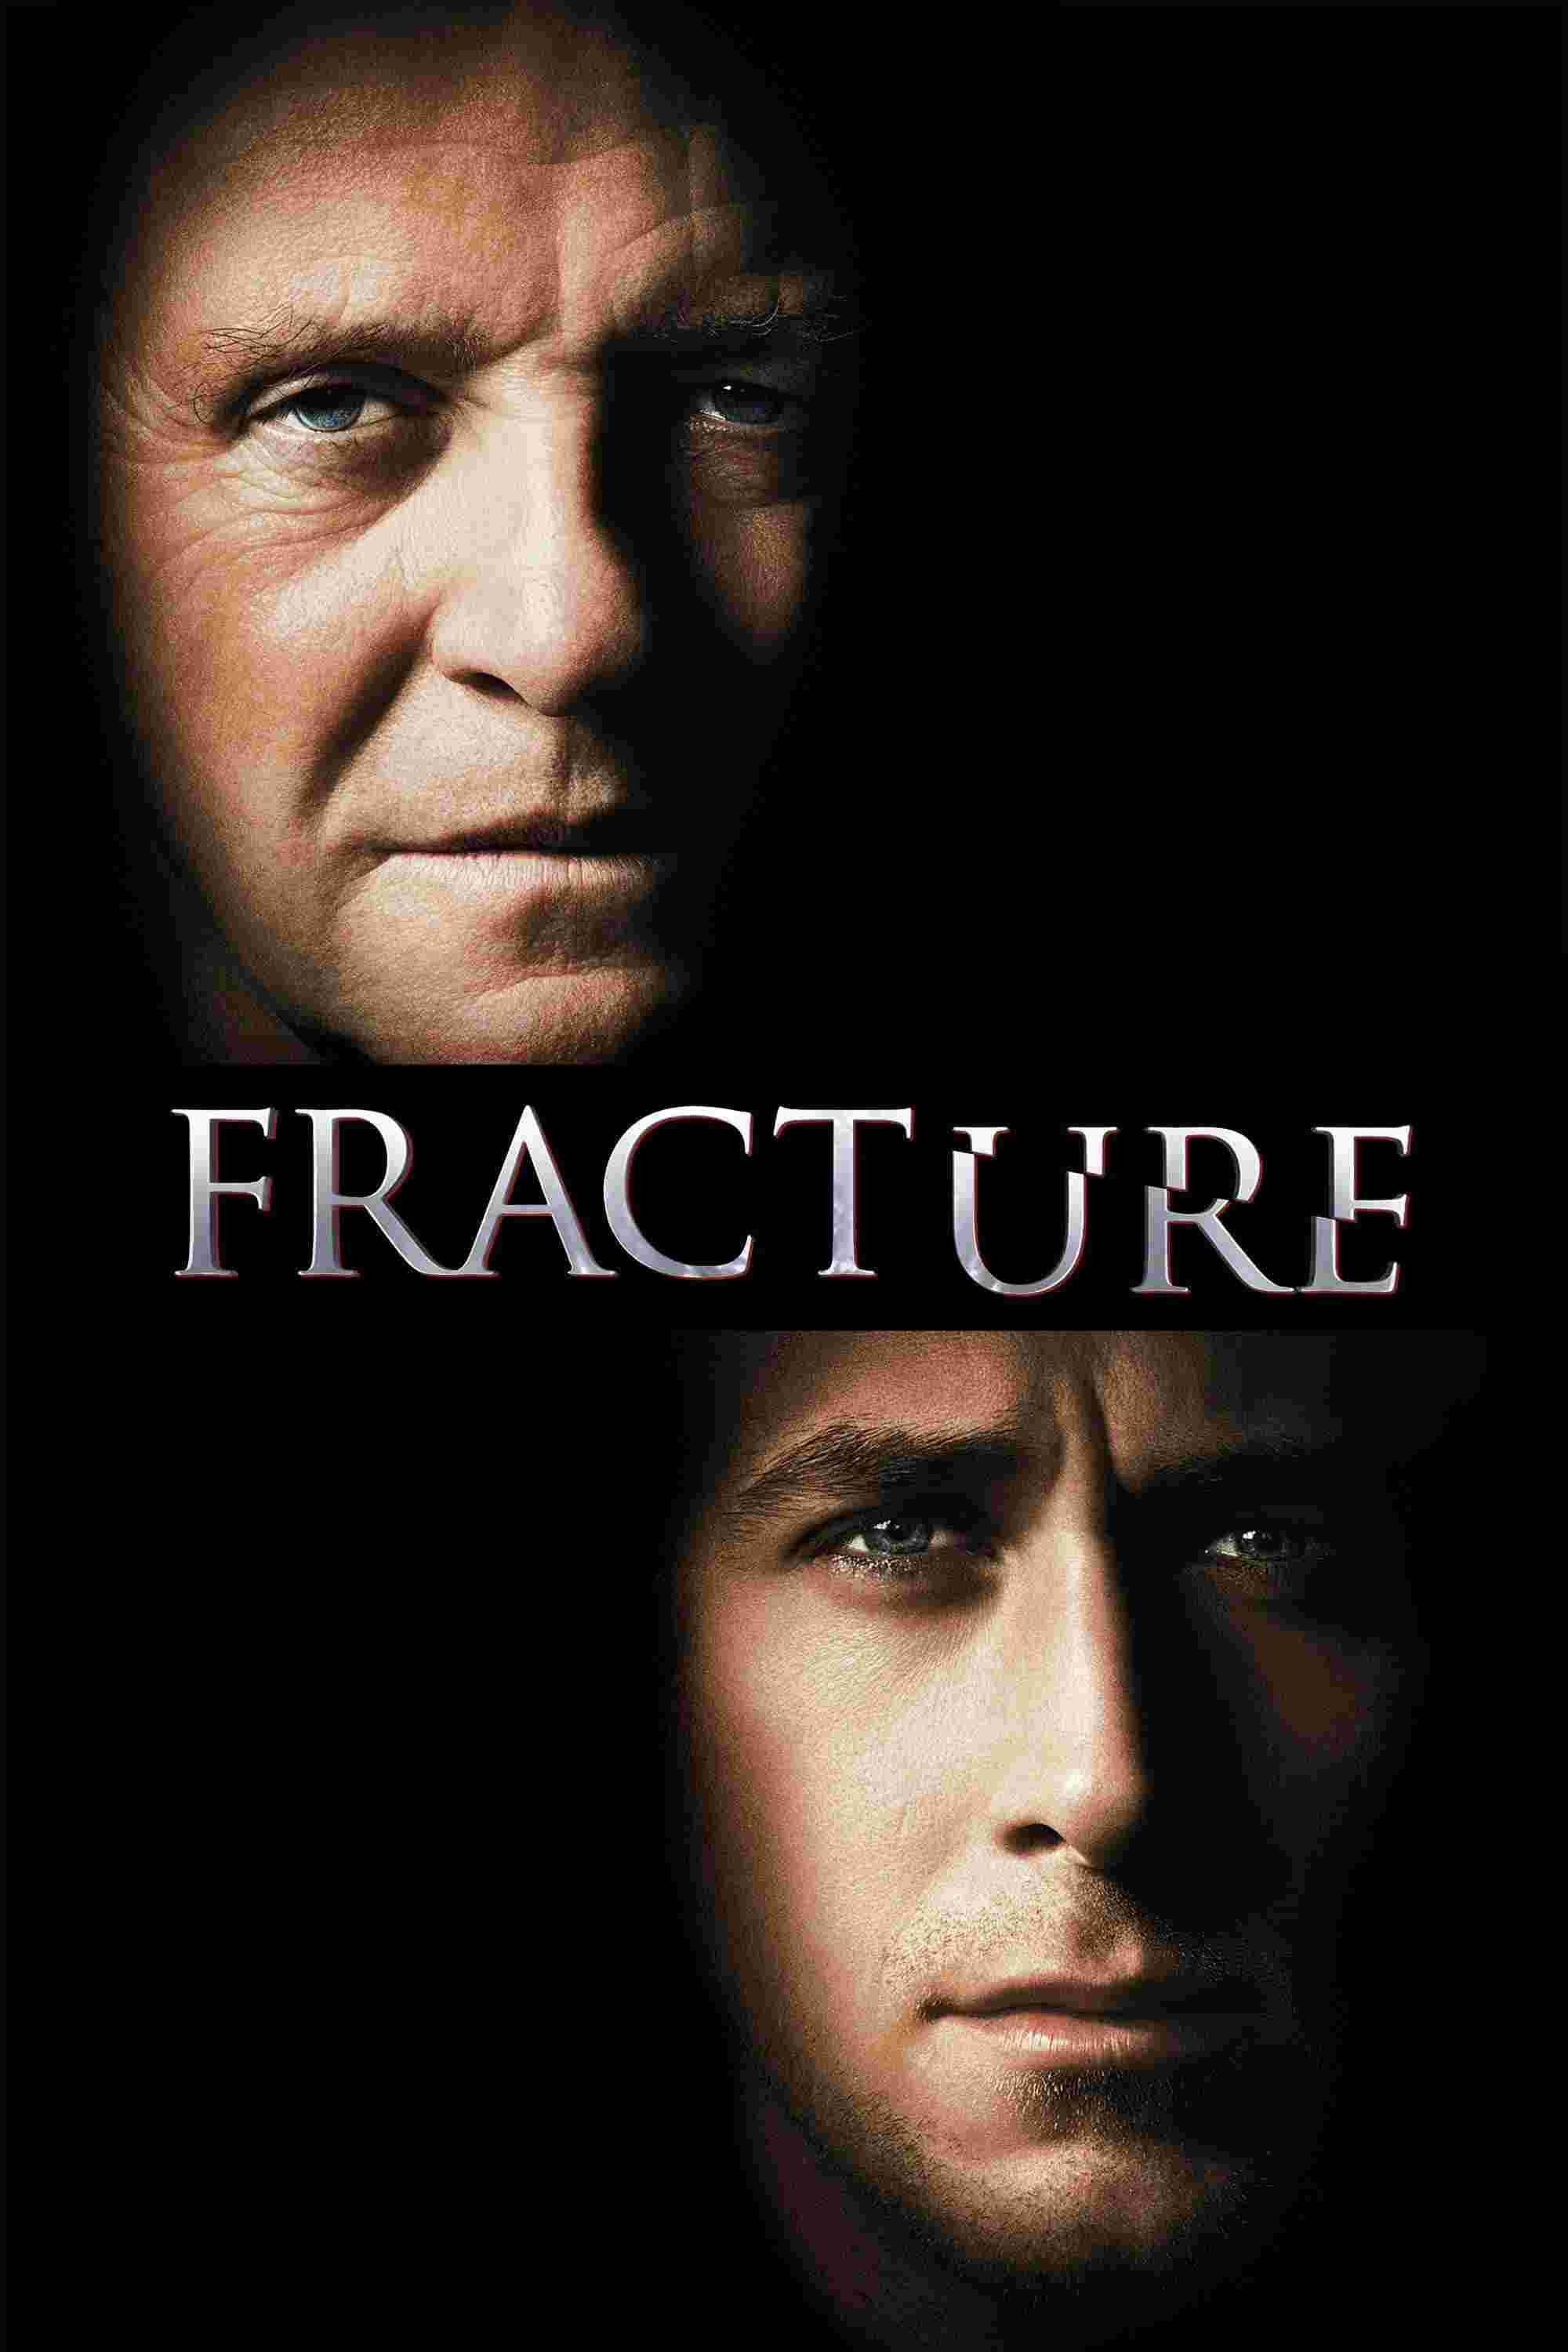 Fracture (2007) Anthony Hopkins